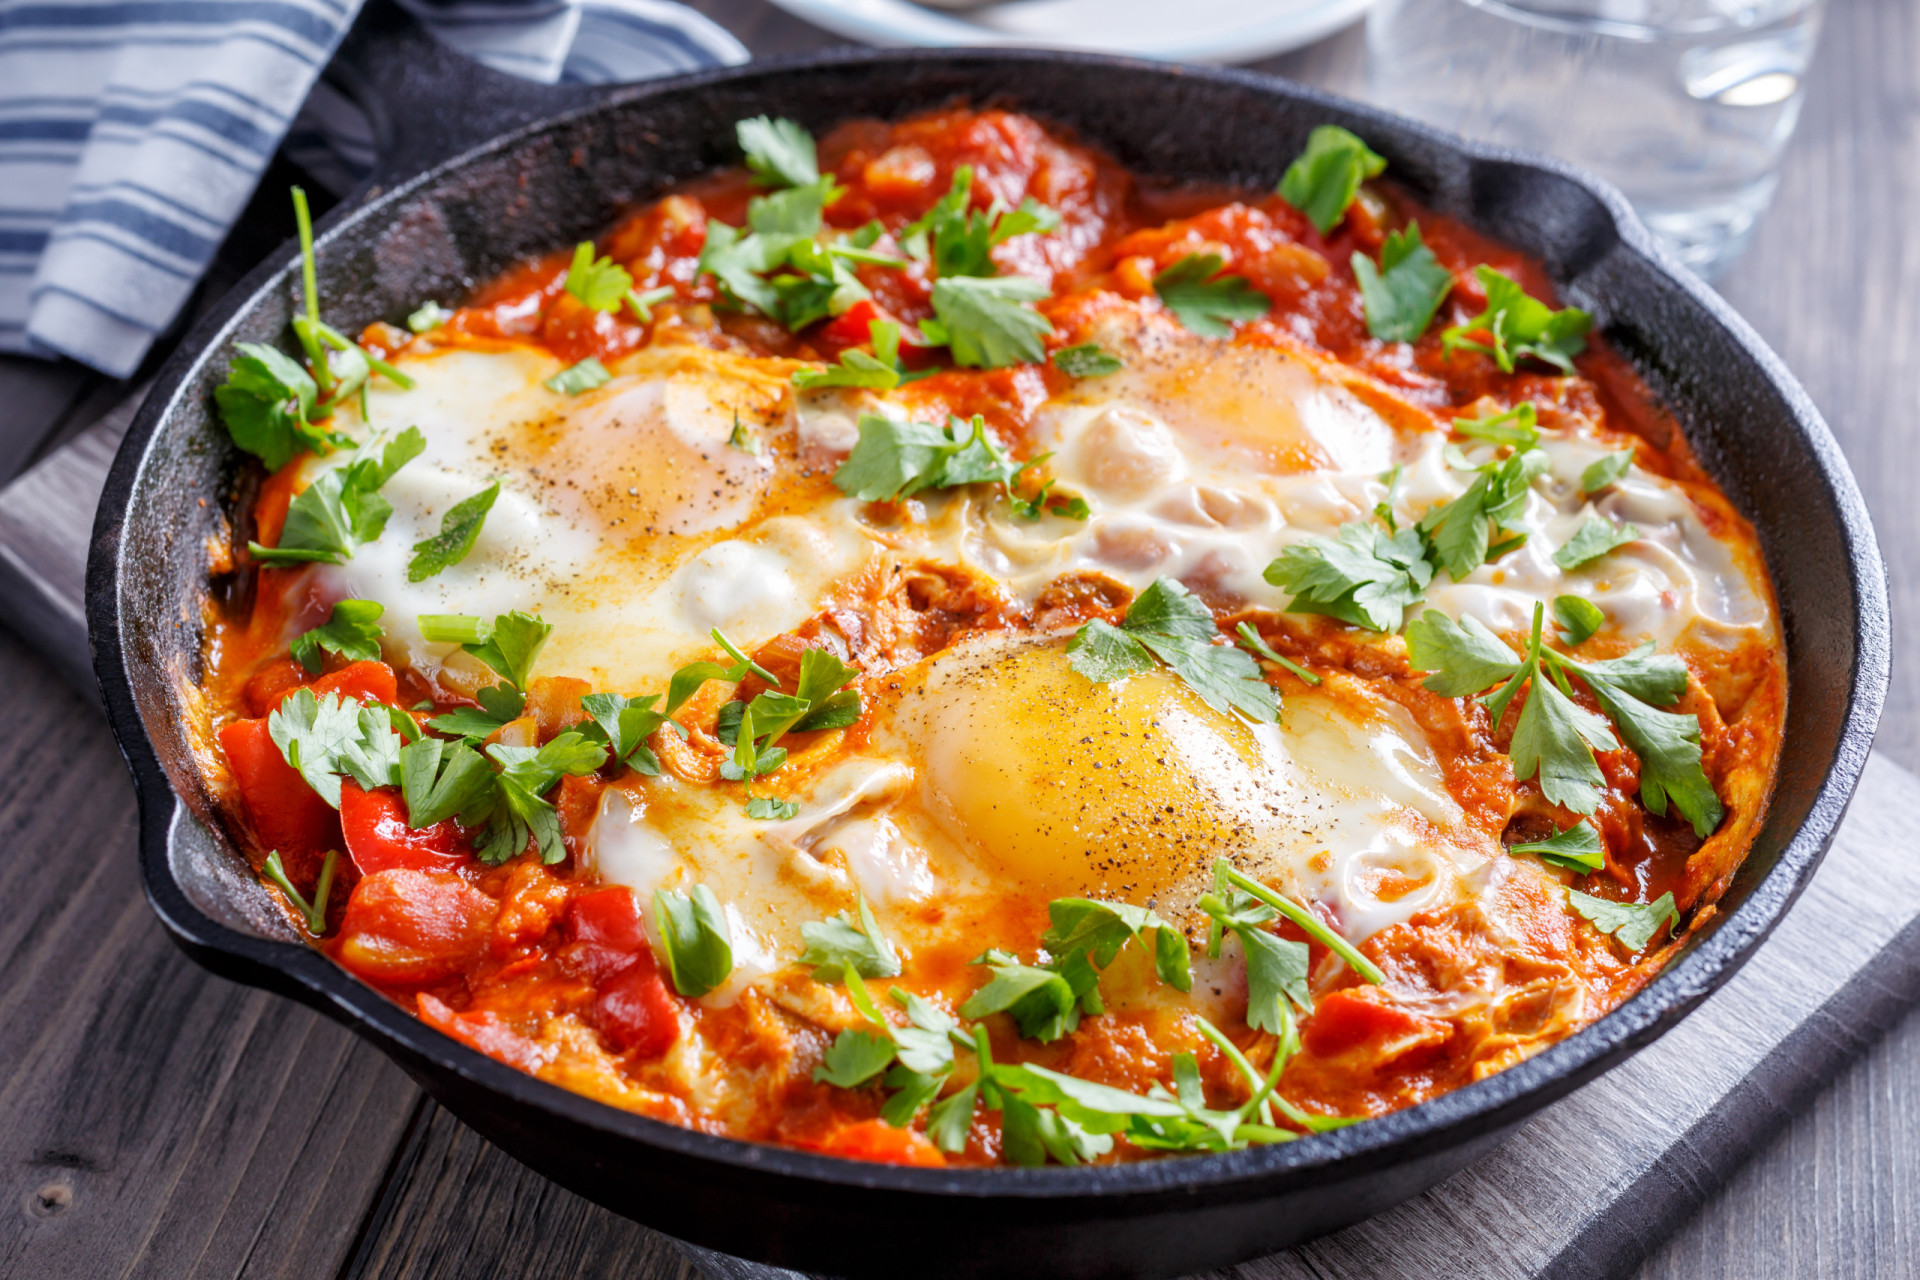 <p><span>Believed to have originated in Tunisia, shakshuka is a one-pan meal featuring poached eggs in a spicy tomato sauce, served with toasted pita bread. It's commonly eaten for breakfast.</span></p><p>You may also like:<a href="https://www.starsinsider.com/n/388254?utm_source=msn.com&utm_medium=display&utm_campaign=referral_description&utm_content=707039en-us"> These breeds make the purrfect house cats</a></p>